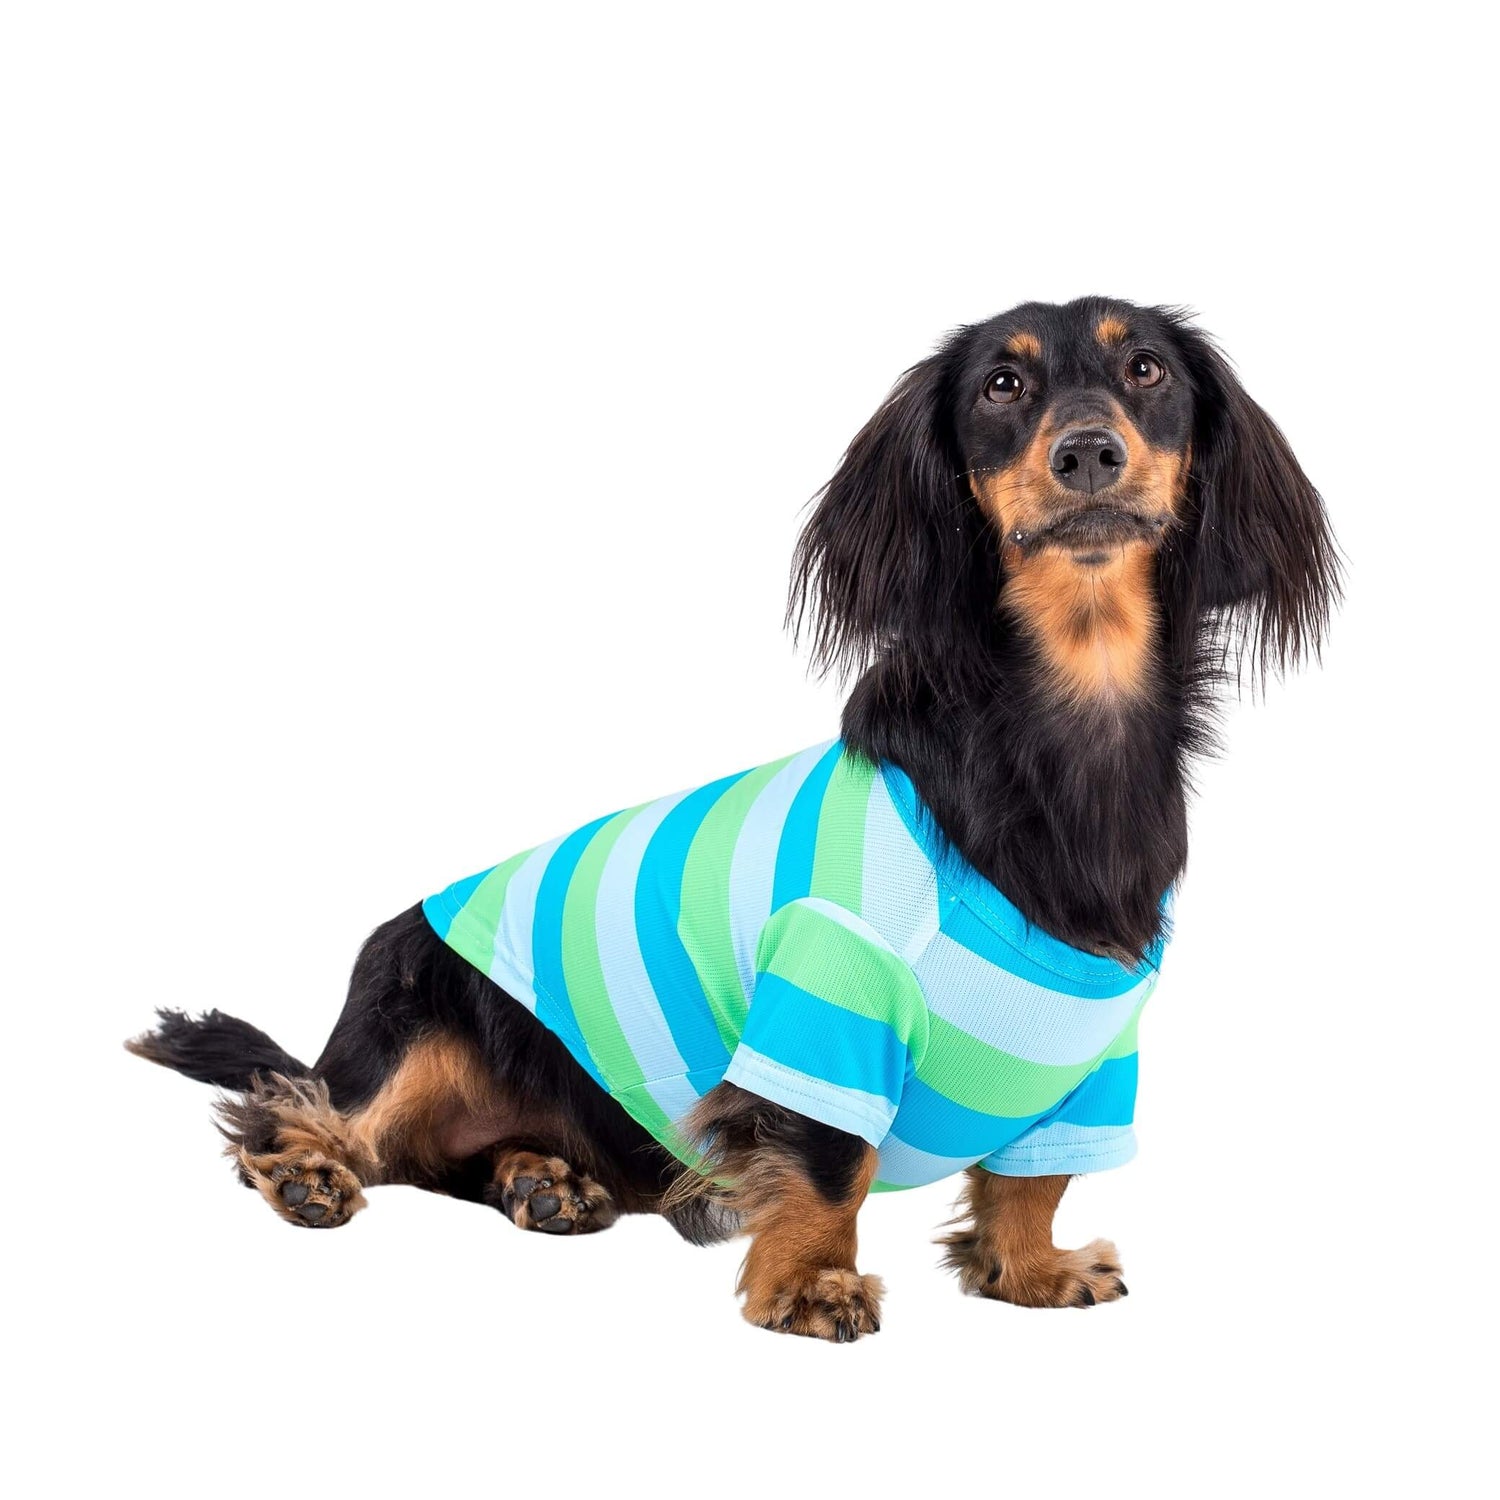 A dachshund wearing Vibrant Hounds Seriously Stripey dog cooling shirt.